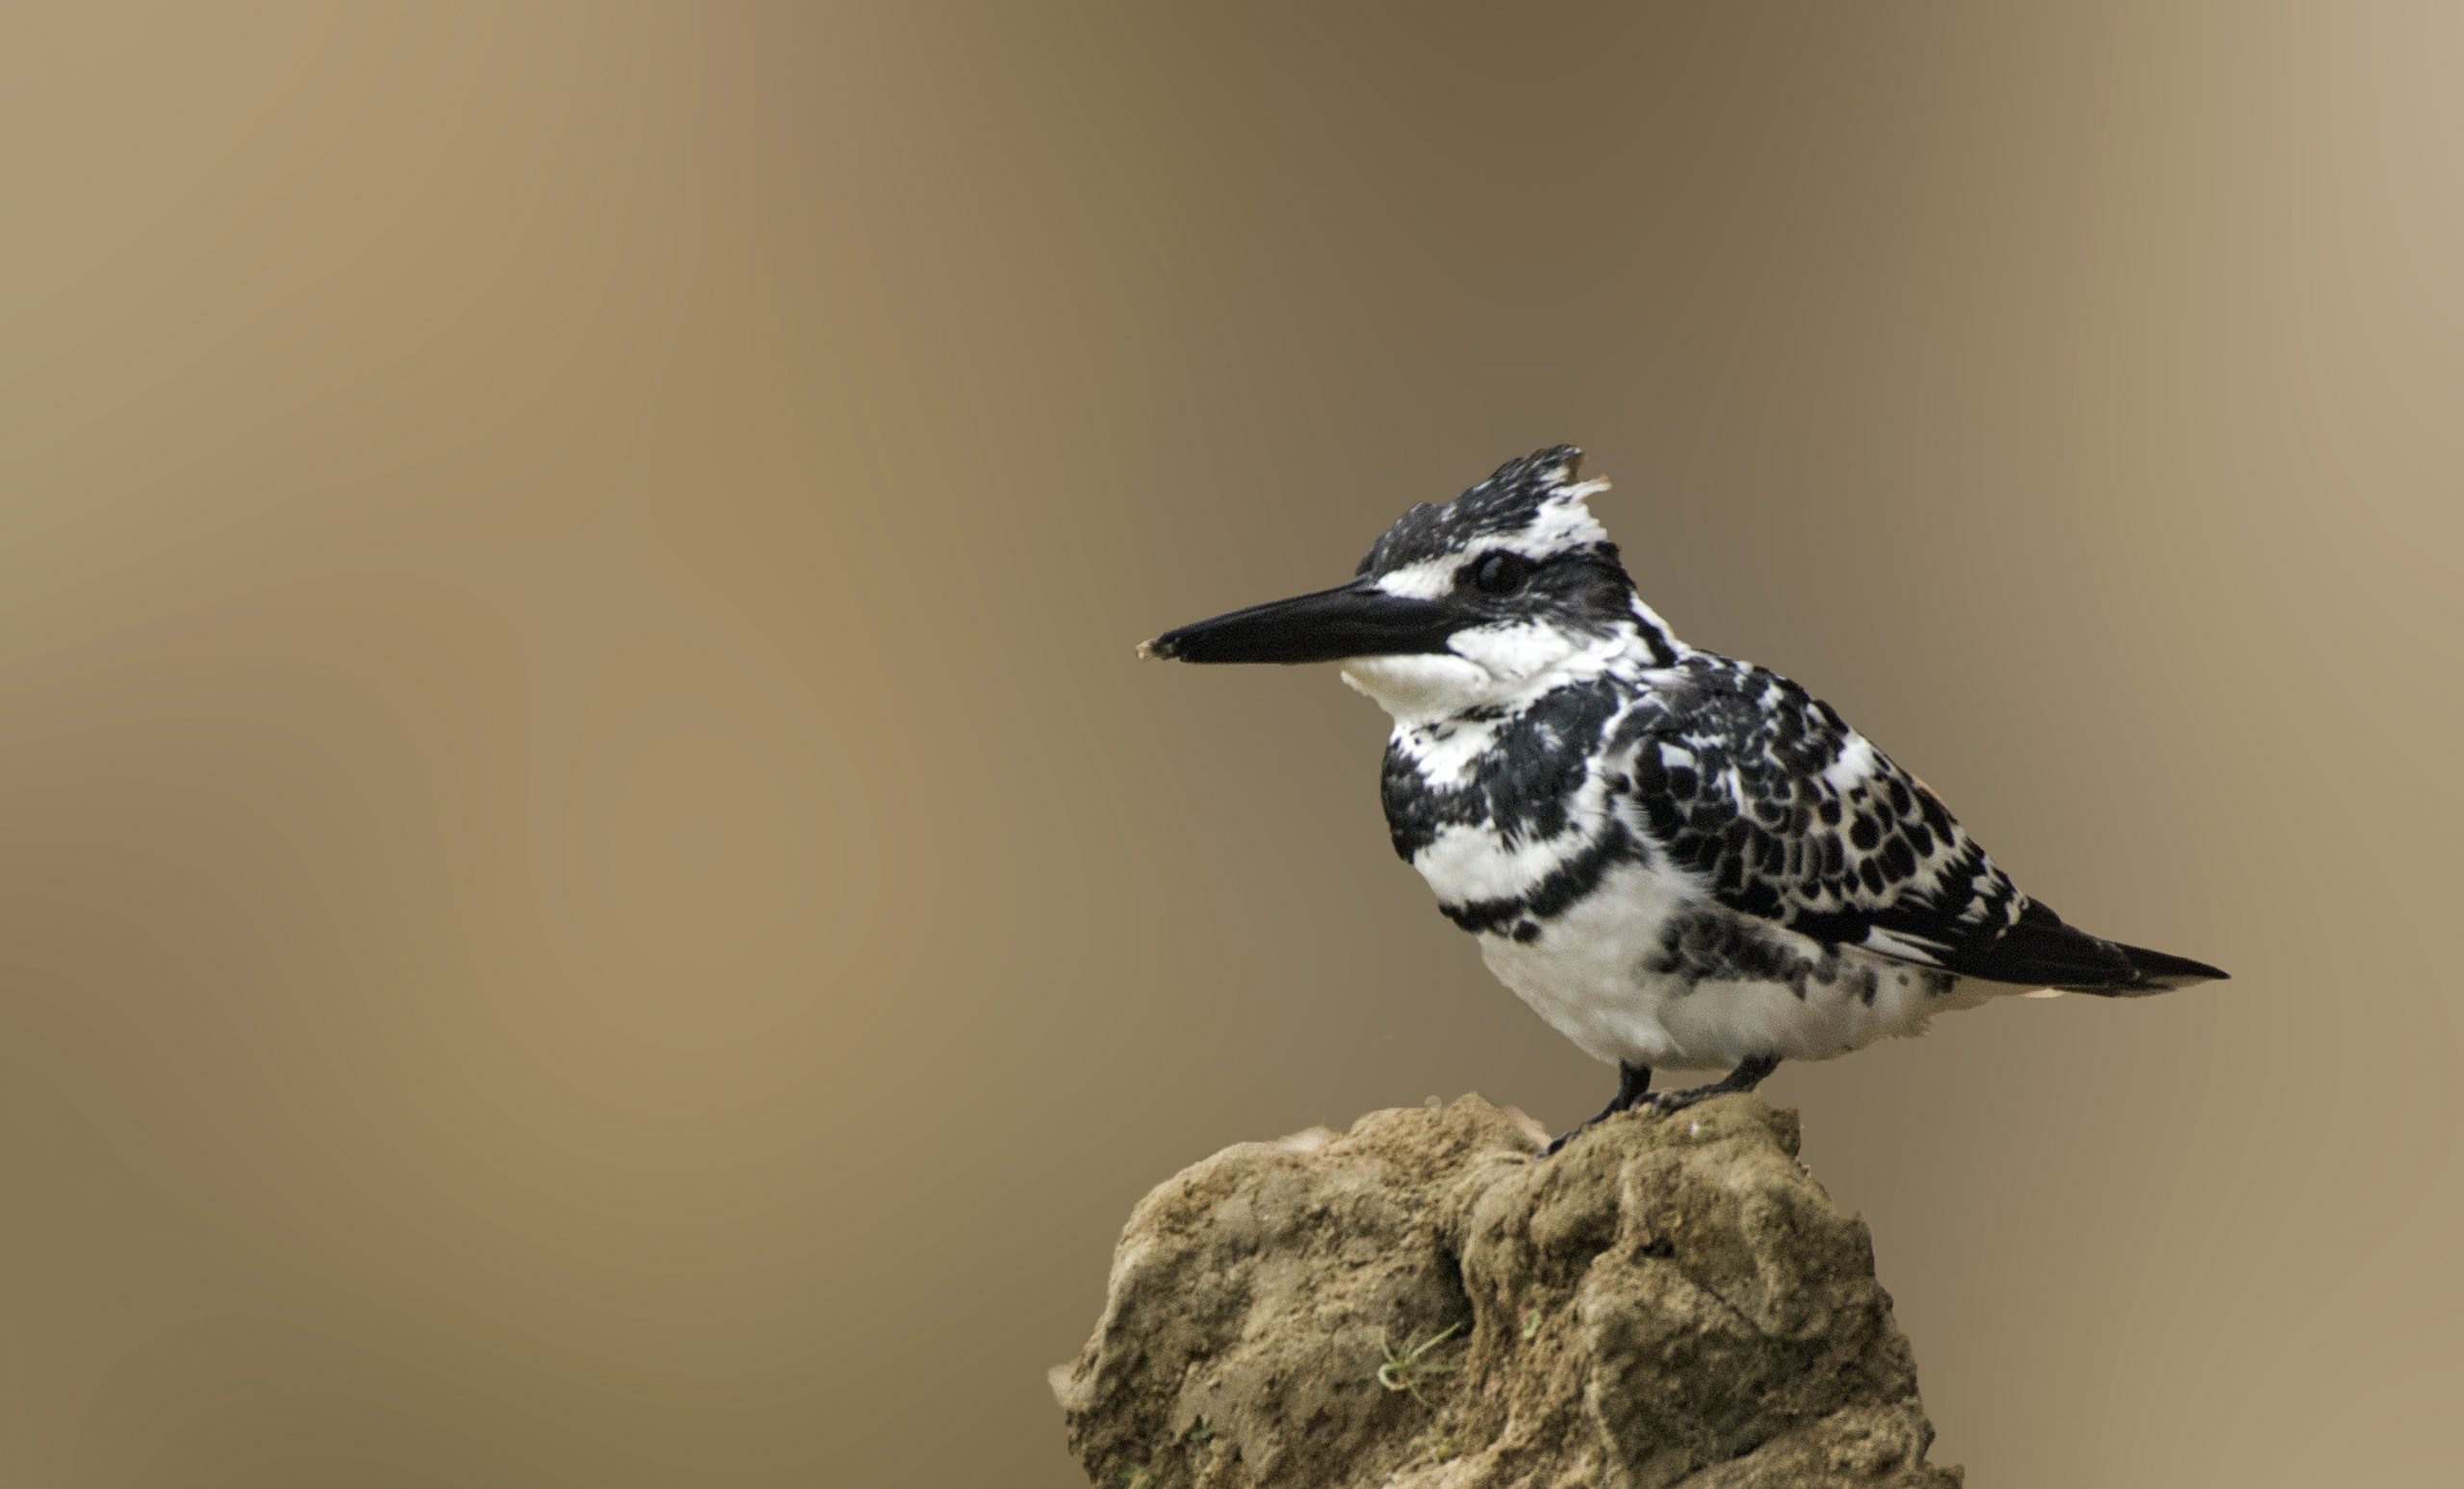 Pied kingfisher on a rock